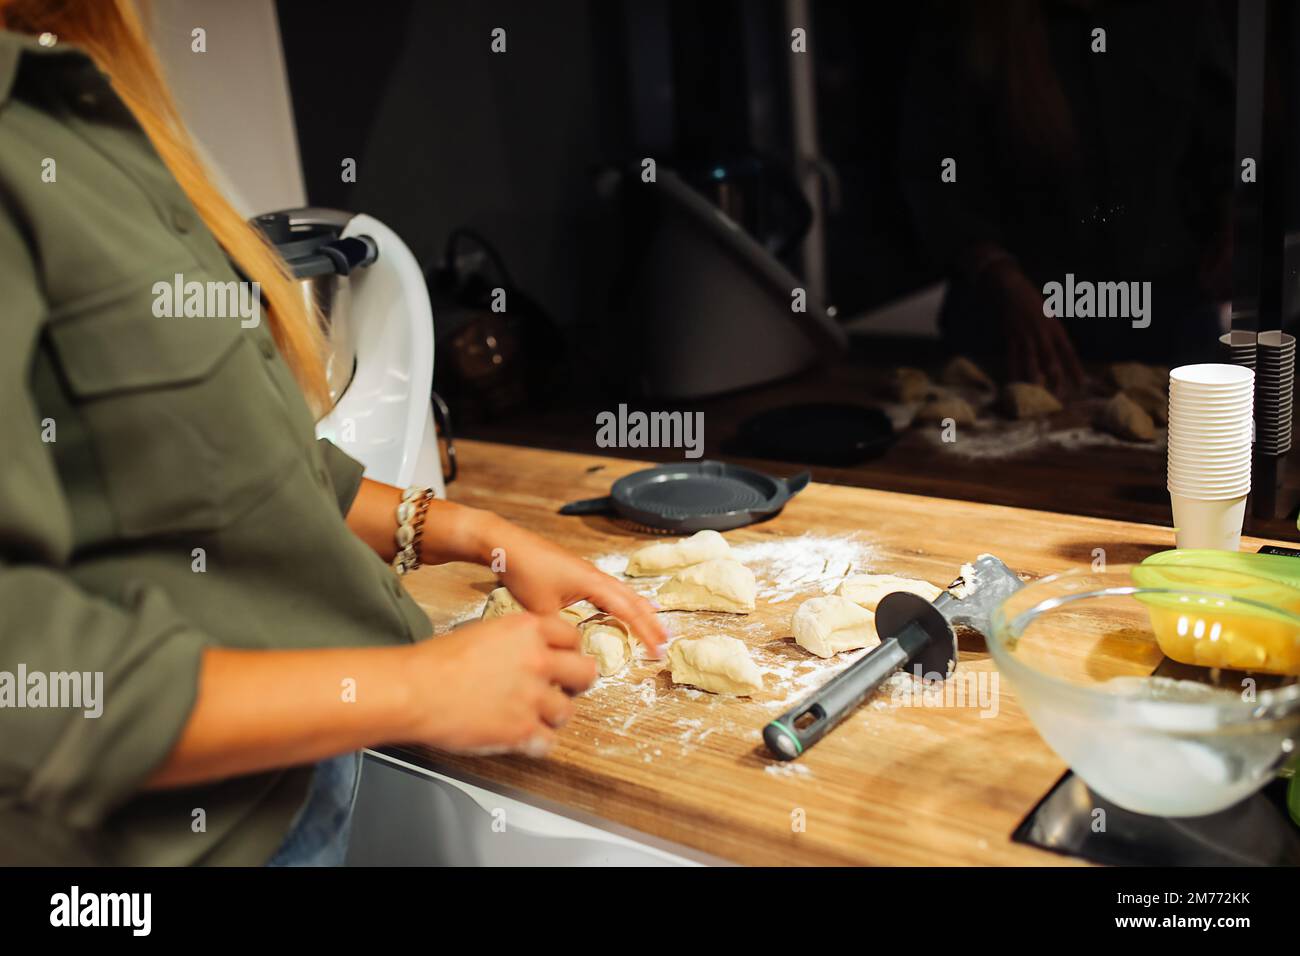 Hands of woman holding formed piece of raw dough. Cutting dough into pieces with knife. Cooking at home kitchen. Stock Photo